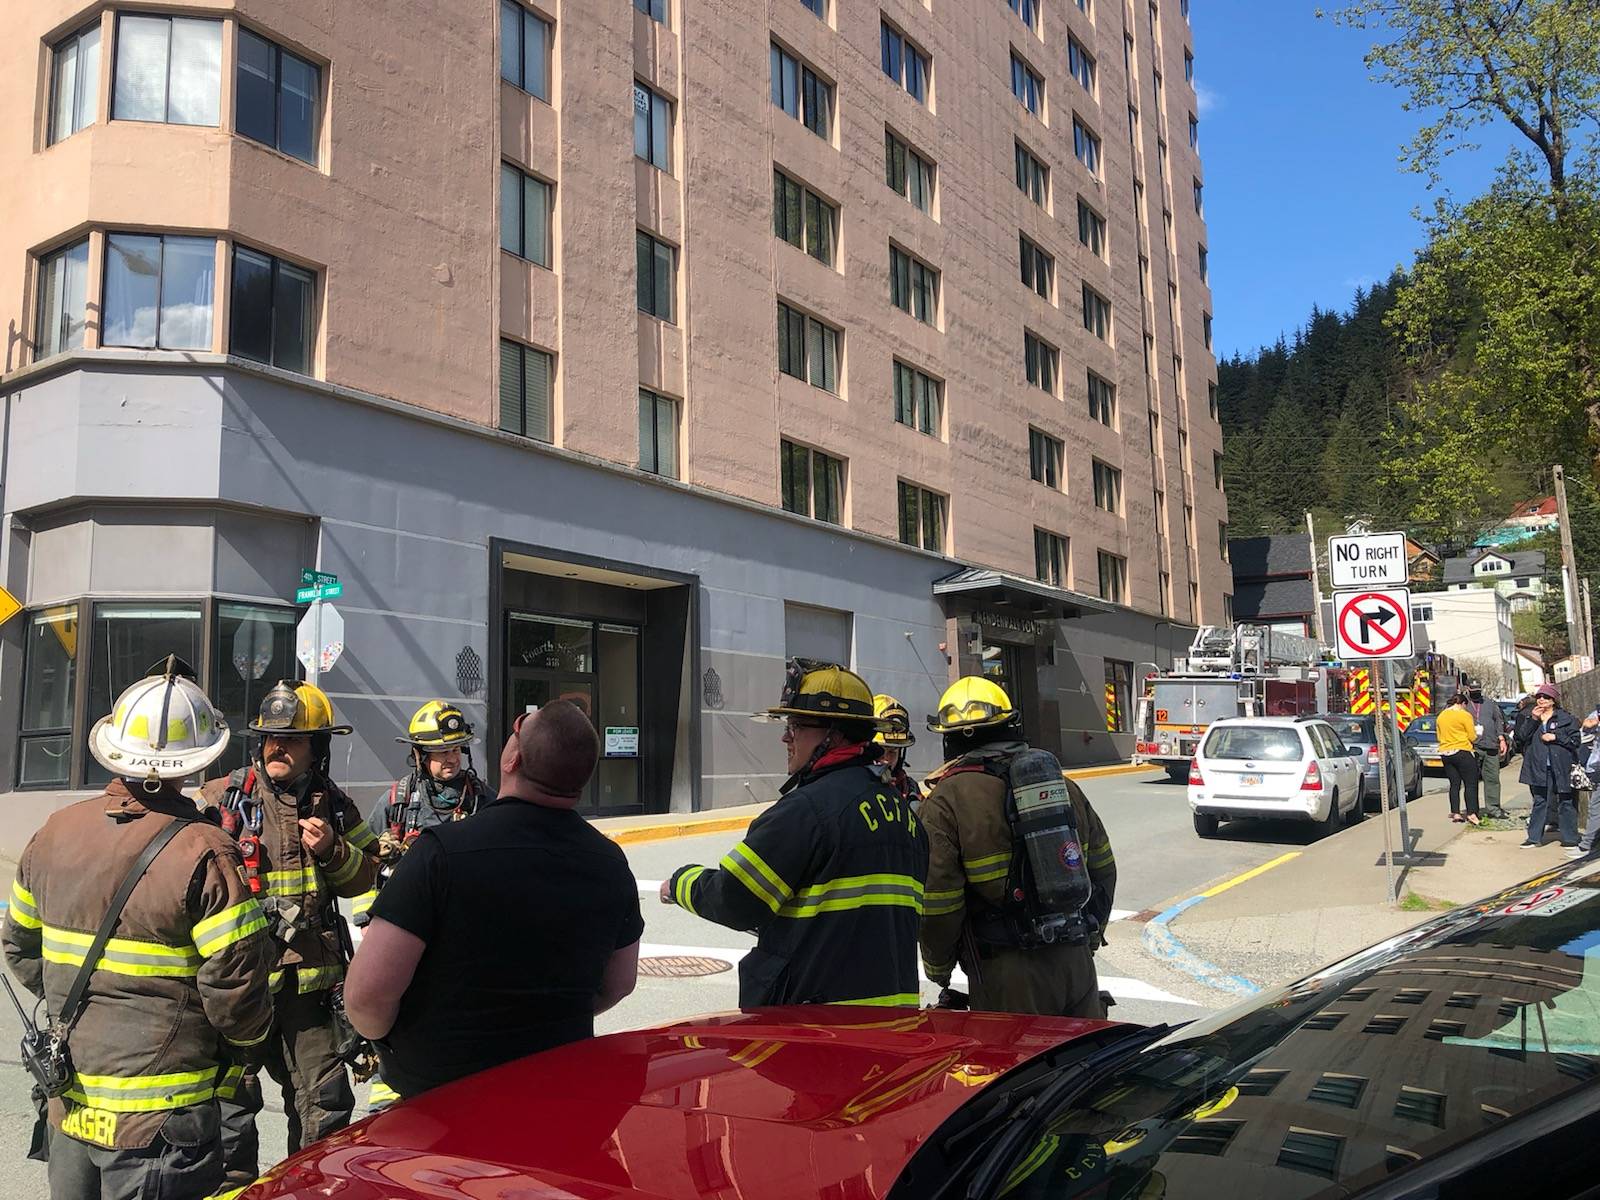 Residents of Mendenhall Towers were briefly evacuated Monday, May 17, while Capital City Fire/Rescue investigated smoke that had appeared, possibly from an electrical fire. (Peter Segall / Juneau Empire)